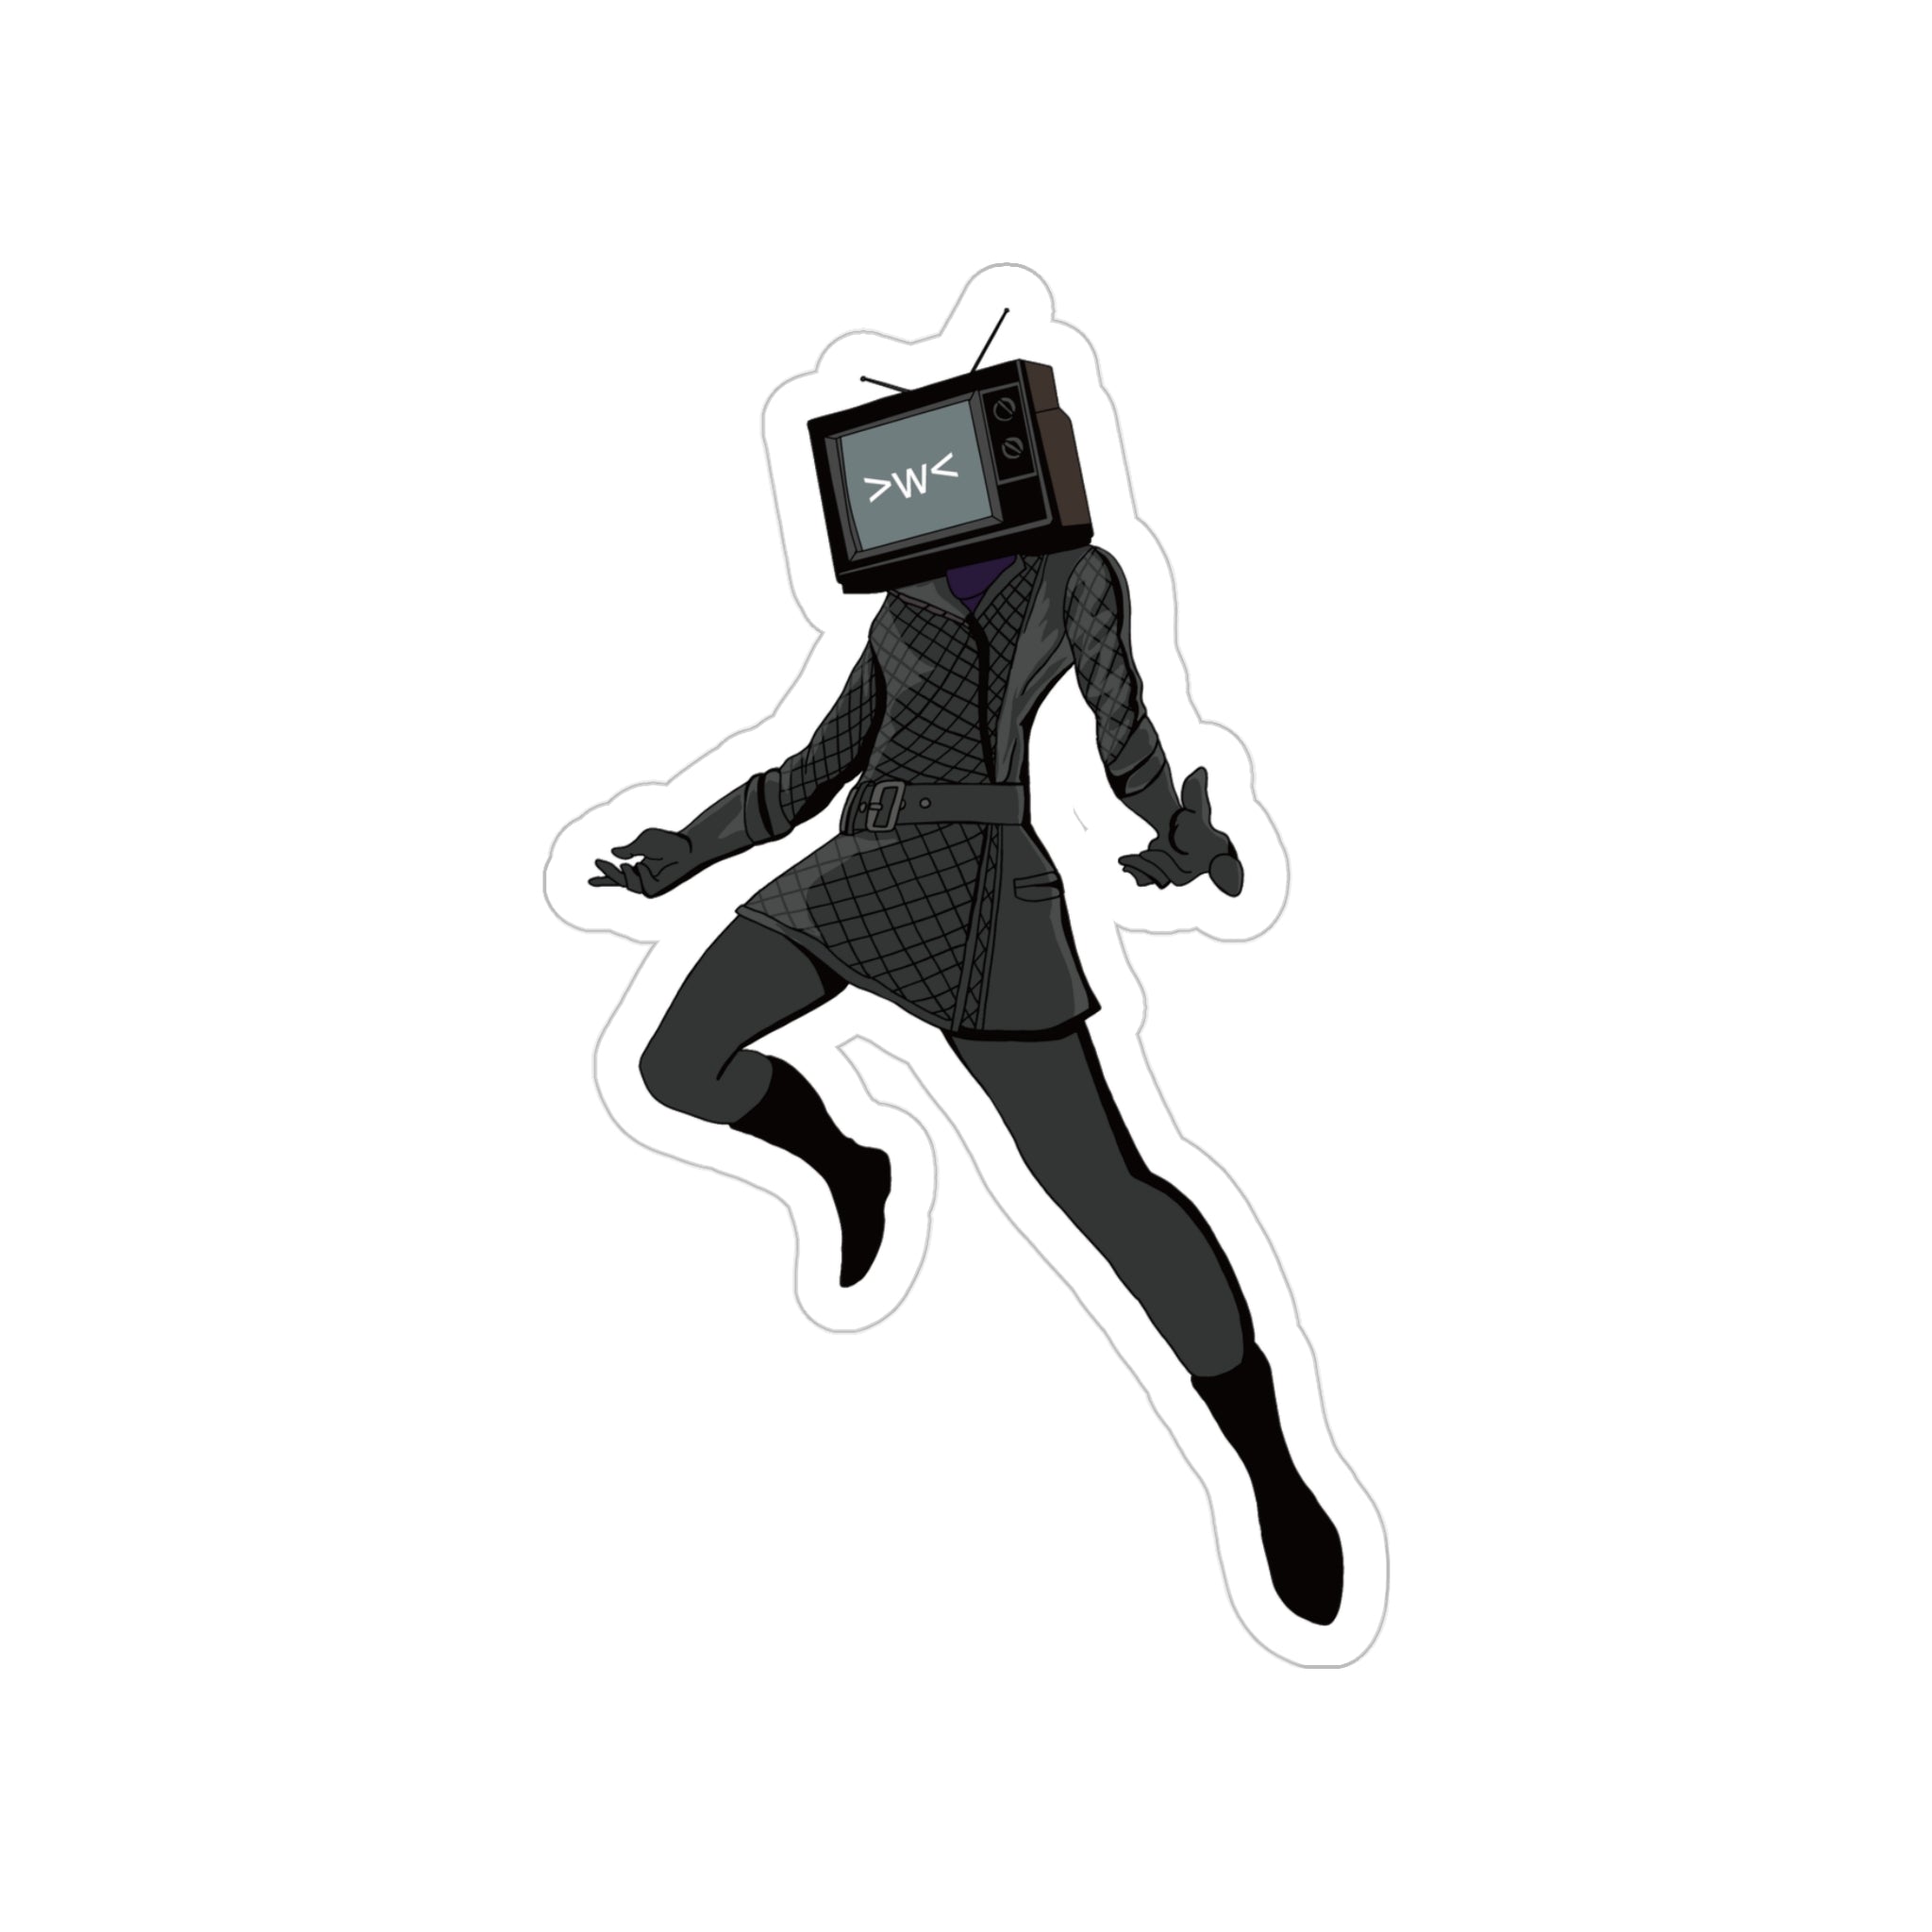 Sticker of TV Woman in a jumping pose